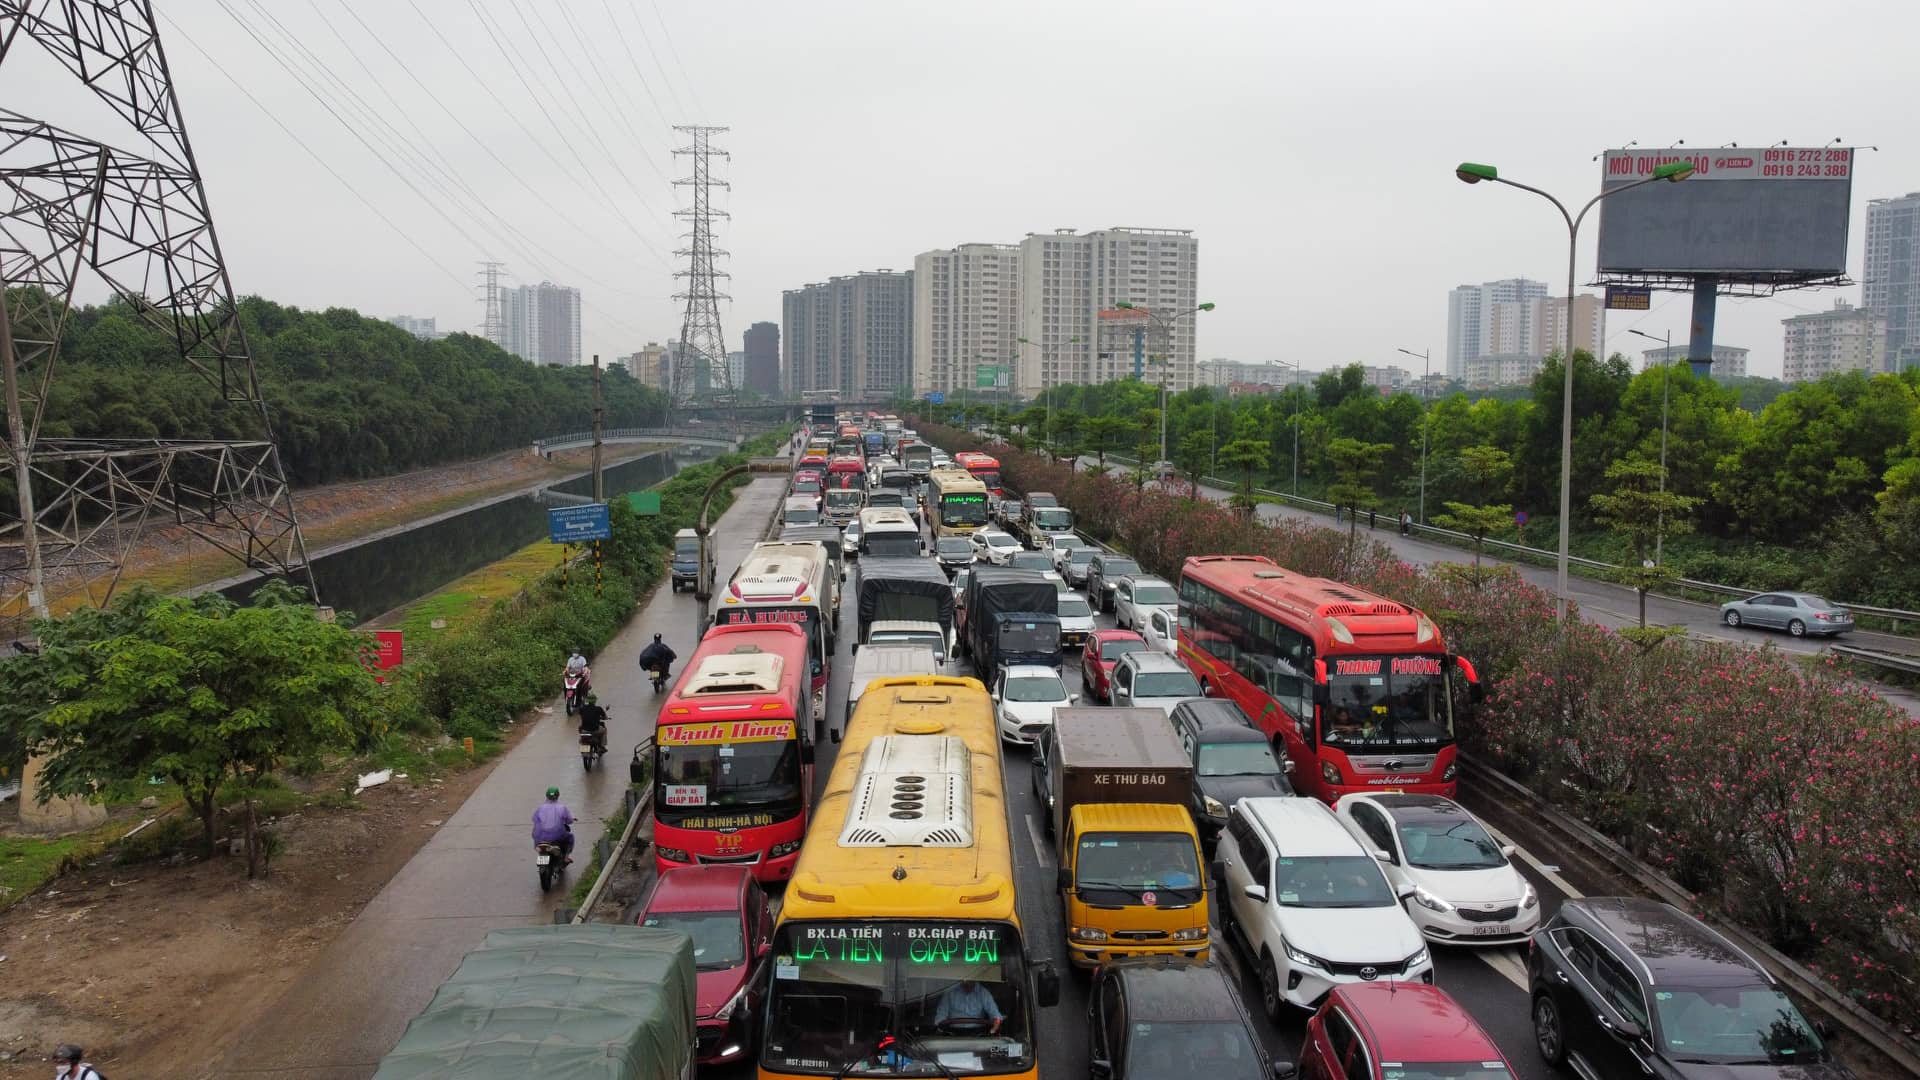 The queue of cars followed each other back to their hometown for the holidays of April 30 and May 1, the streets of Hanoi and Ho Chi Minh City were congested - April 21